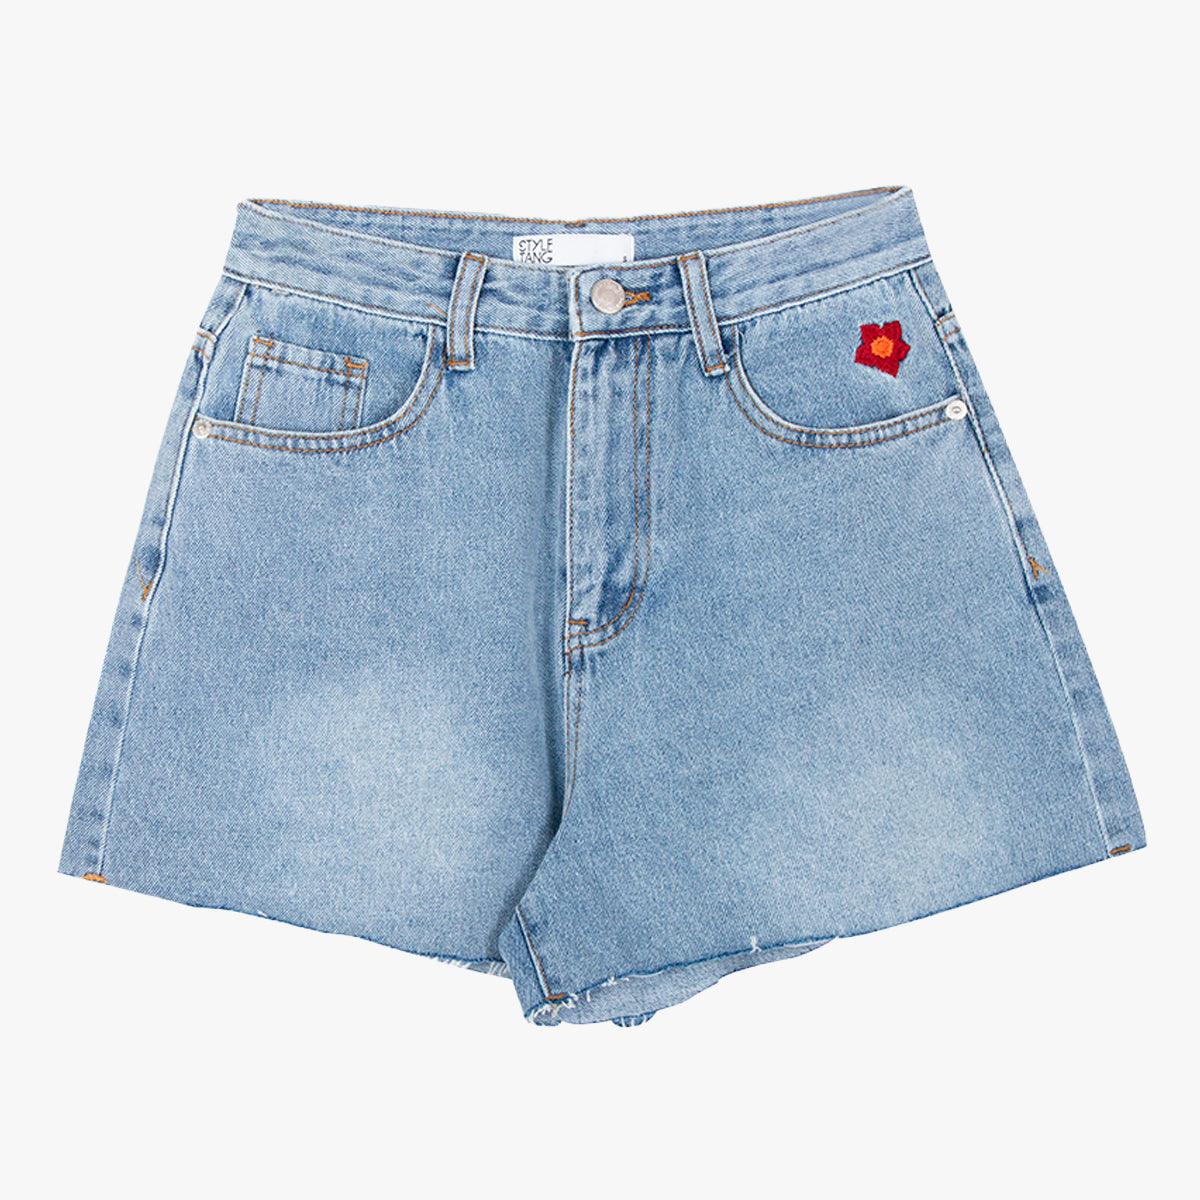 Sunflower Embroidery Light Blue Shorts - Aesthetic Clothes Shop